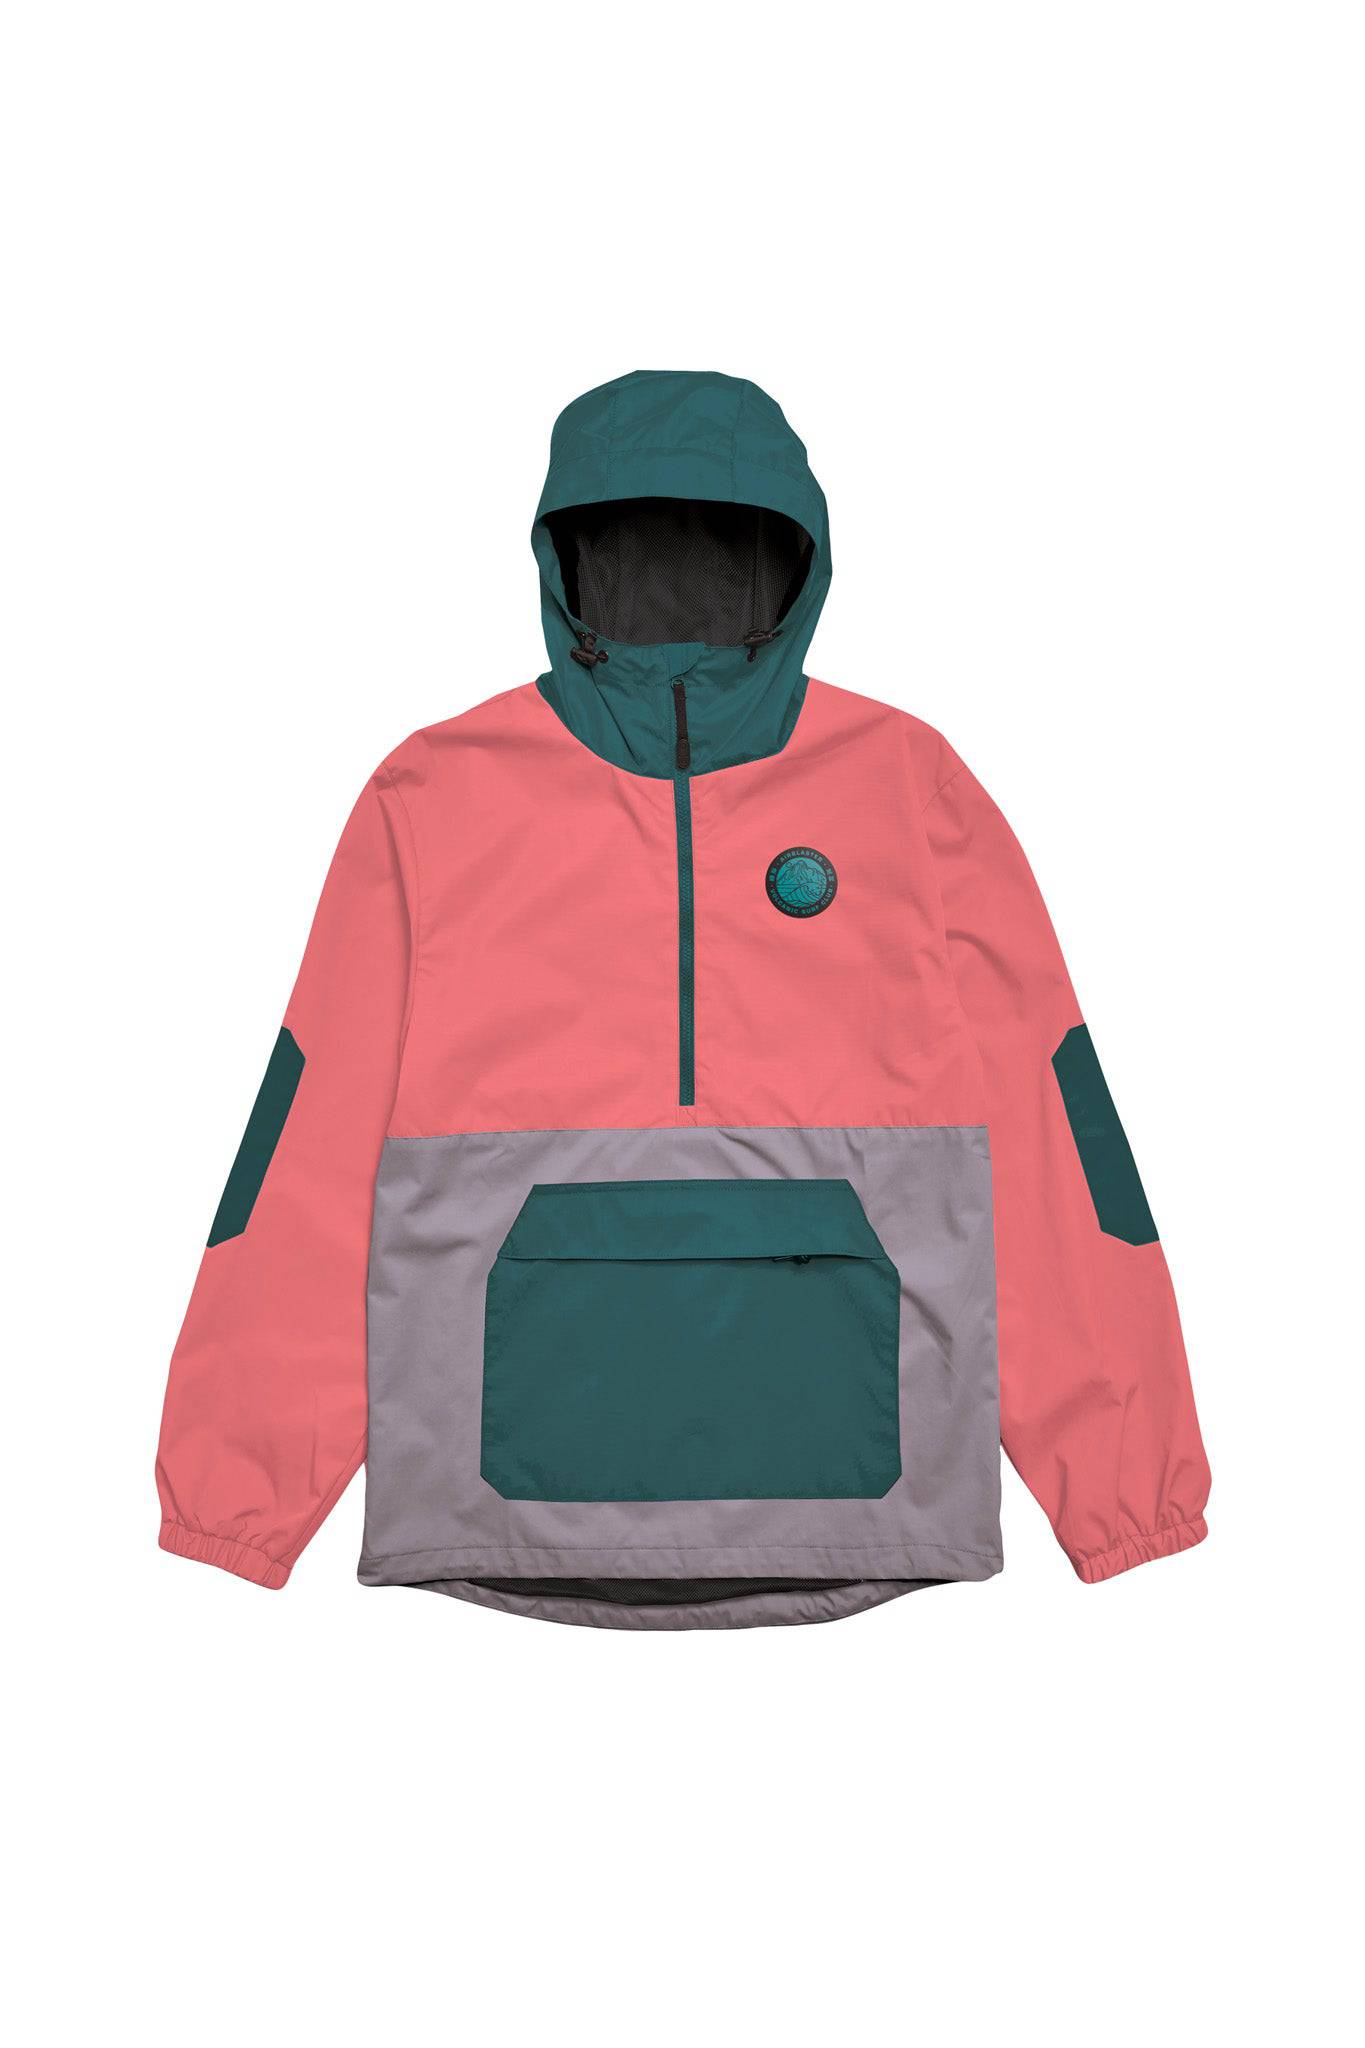 Airblaster Breakwinder Packable Pullover Jacket in Hot Coral and Spruce  2023 | M I L O S P O R T